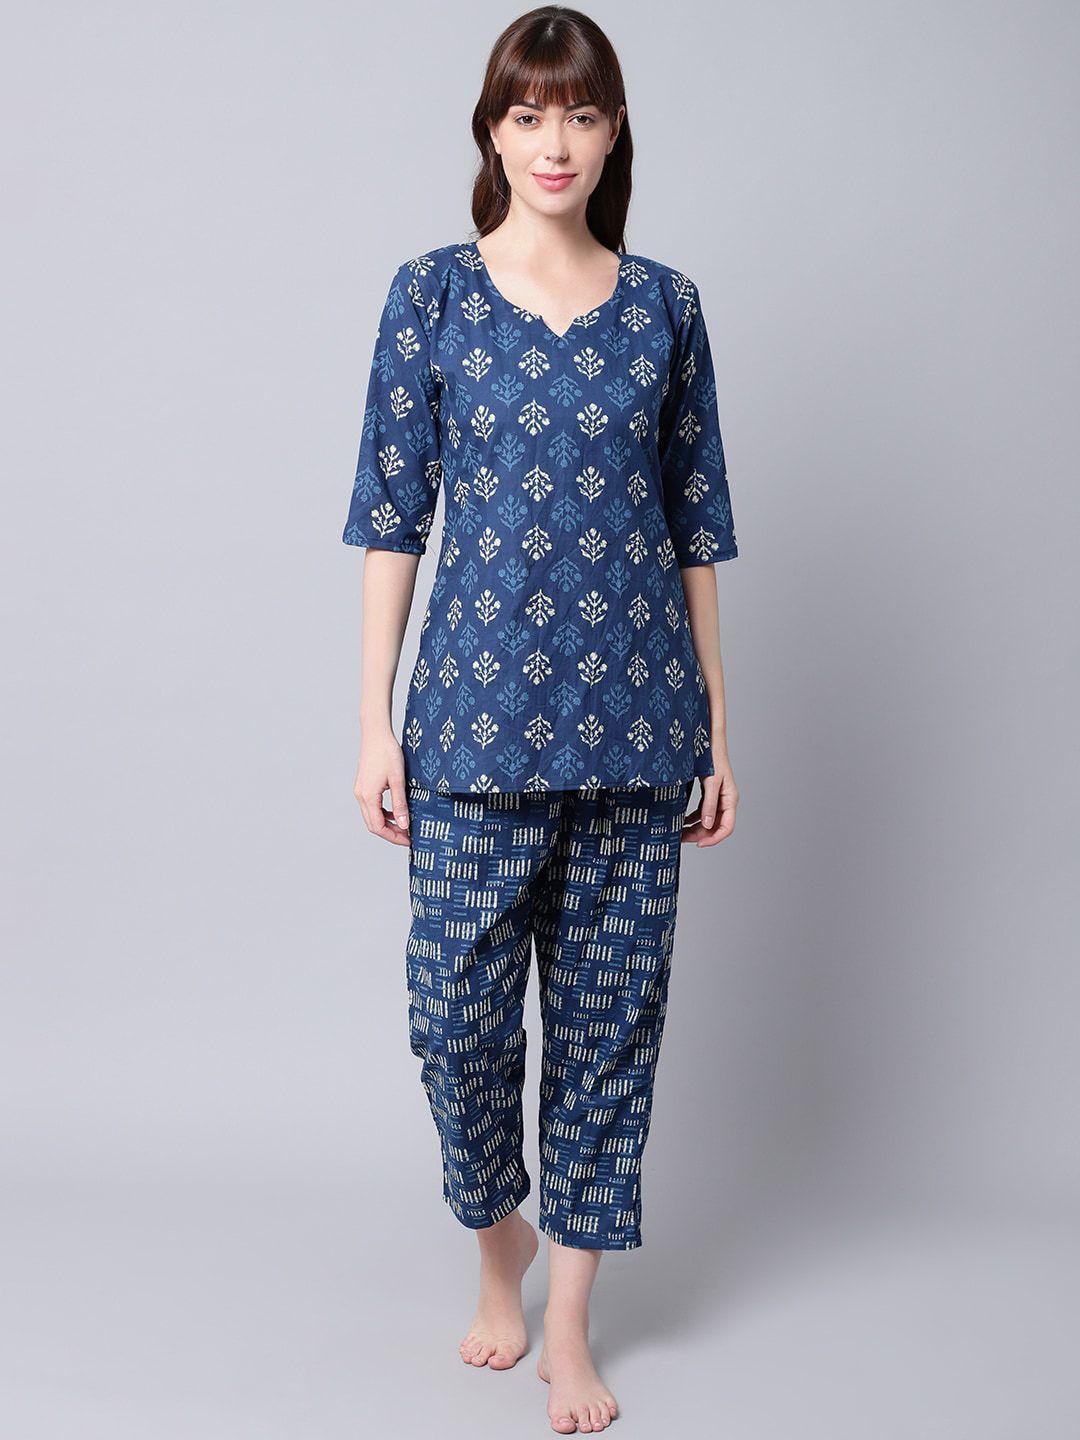 tag 7 women blue & white printed pure cotton night suit